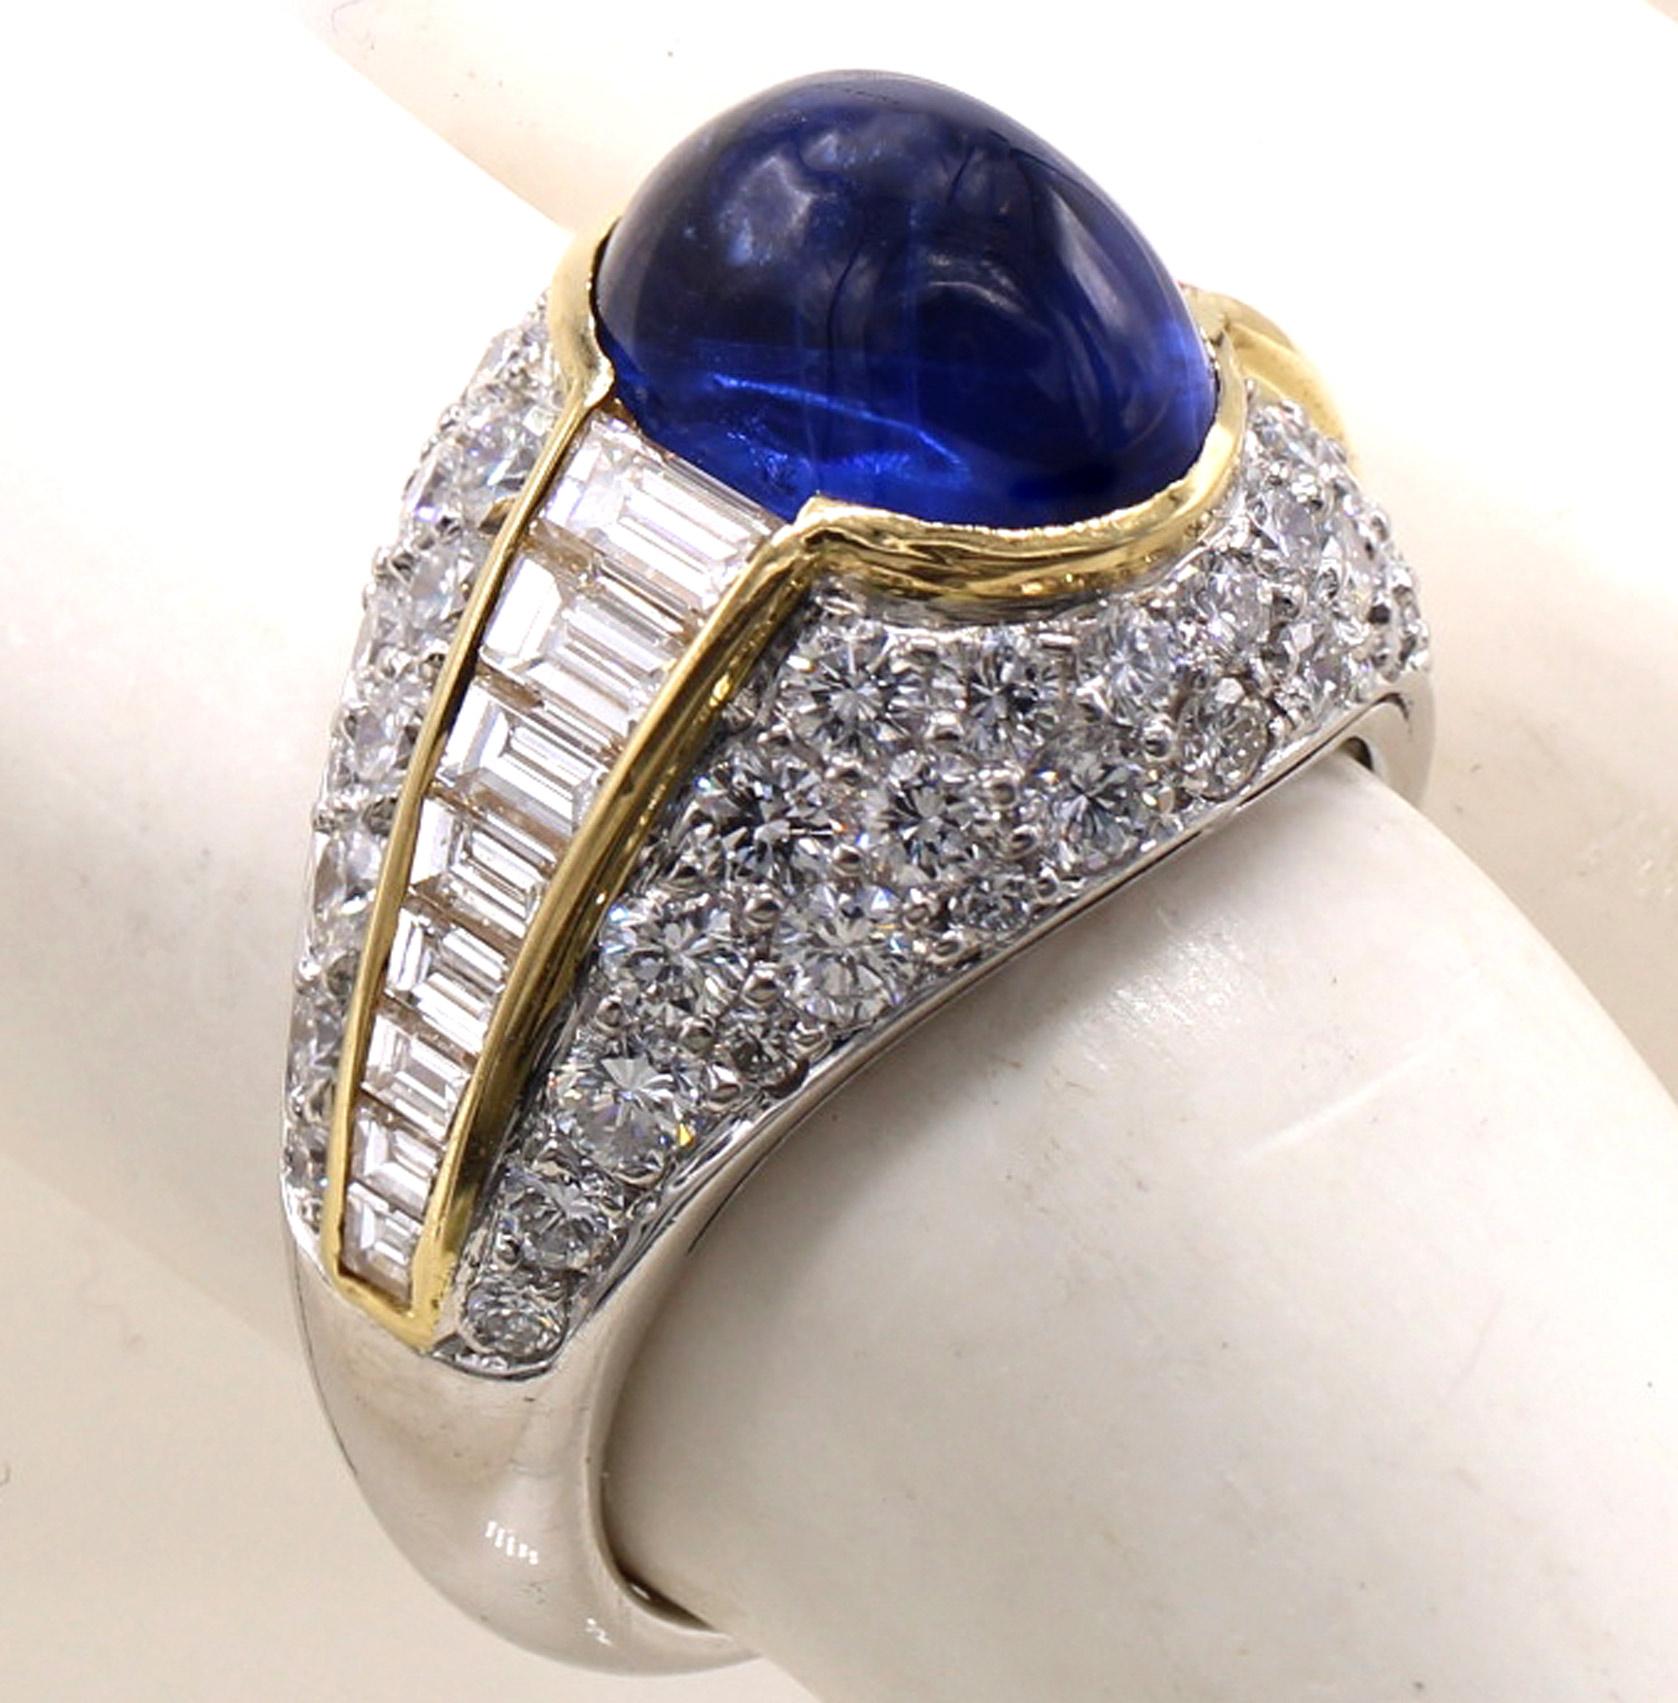 Beautifully designed and masterfully handcrafted by the renown Italian jeweler Bulgari, this 1980s 